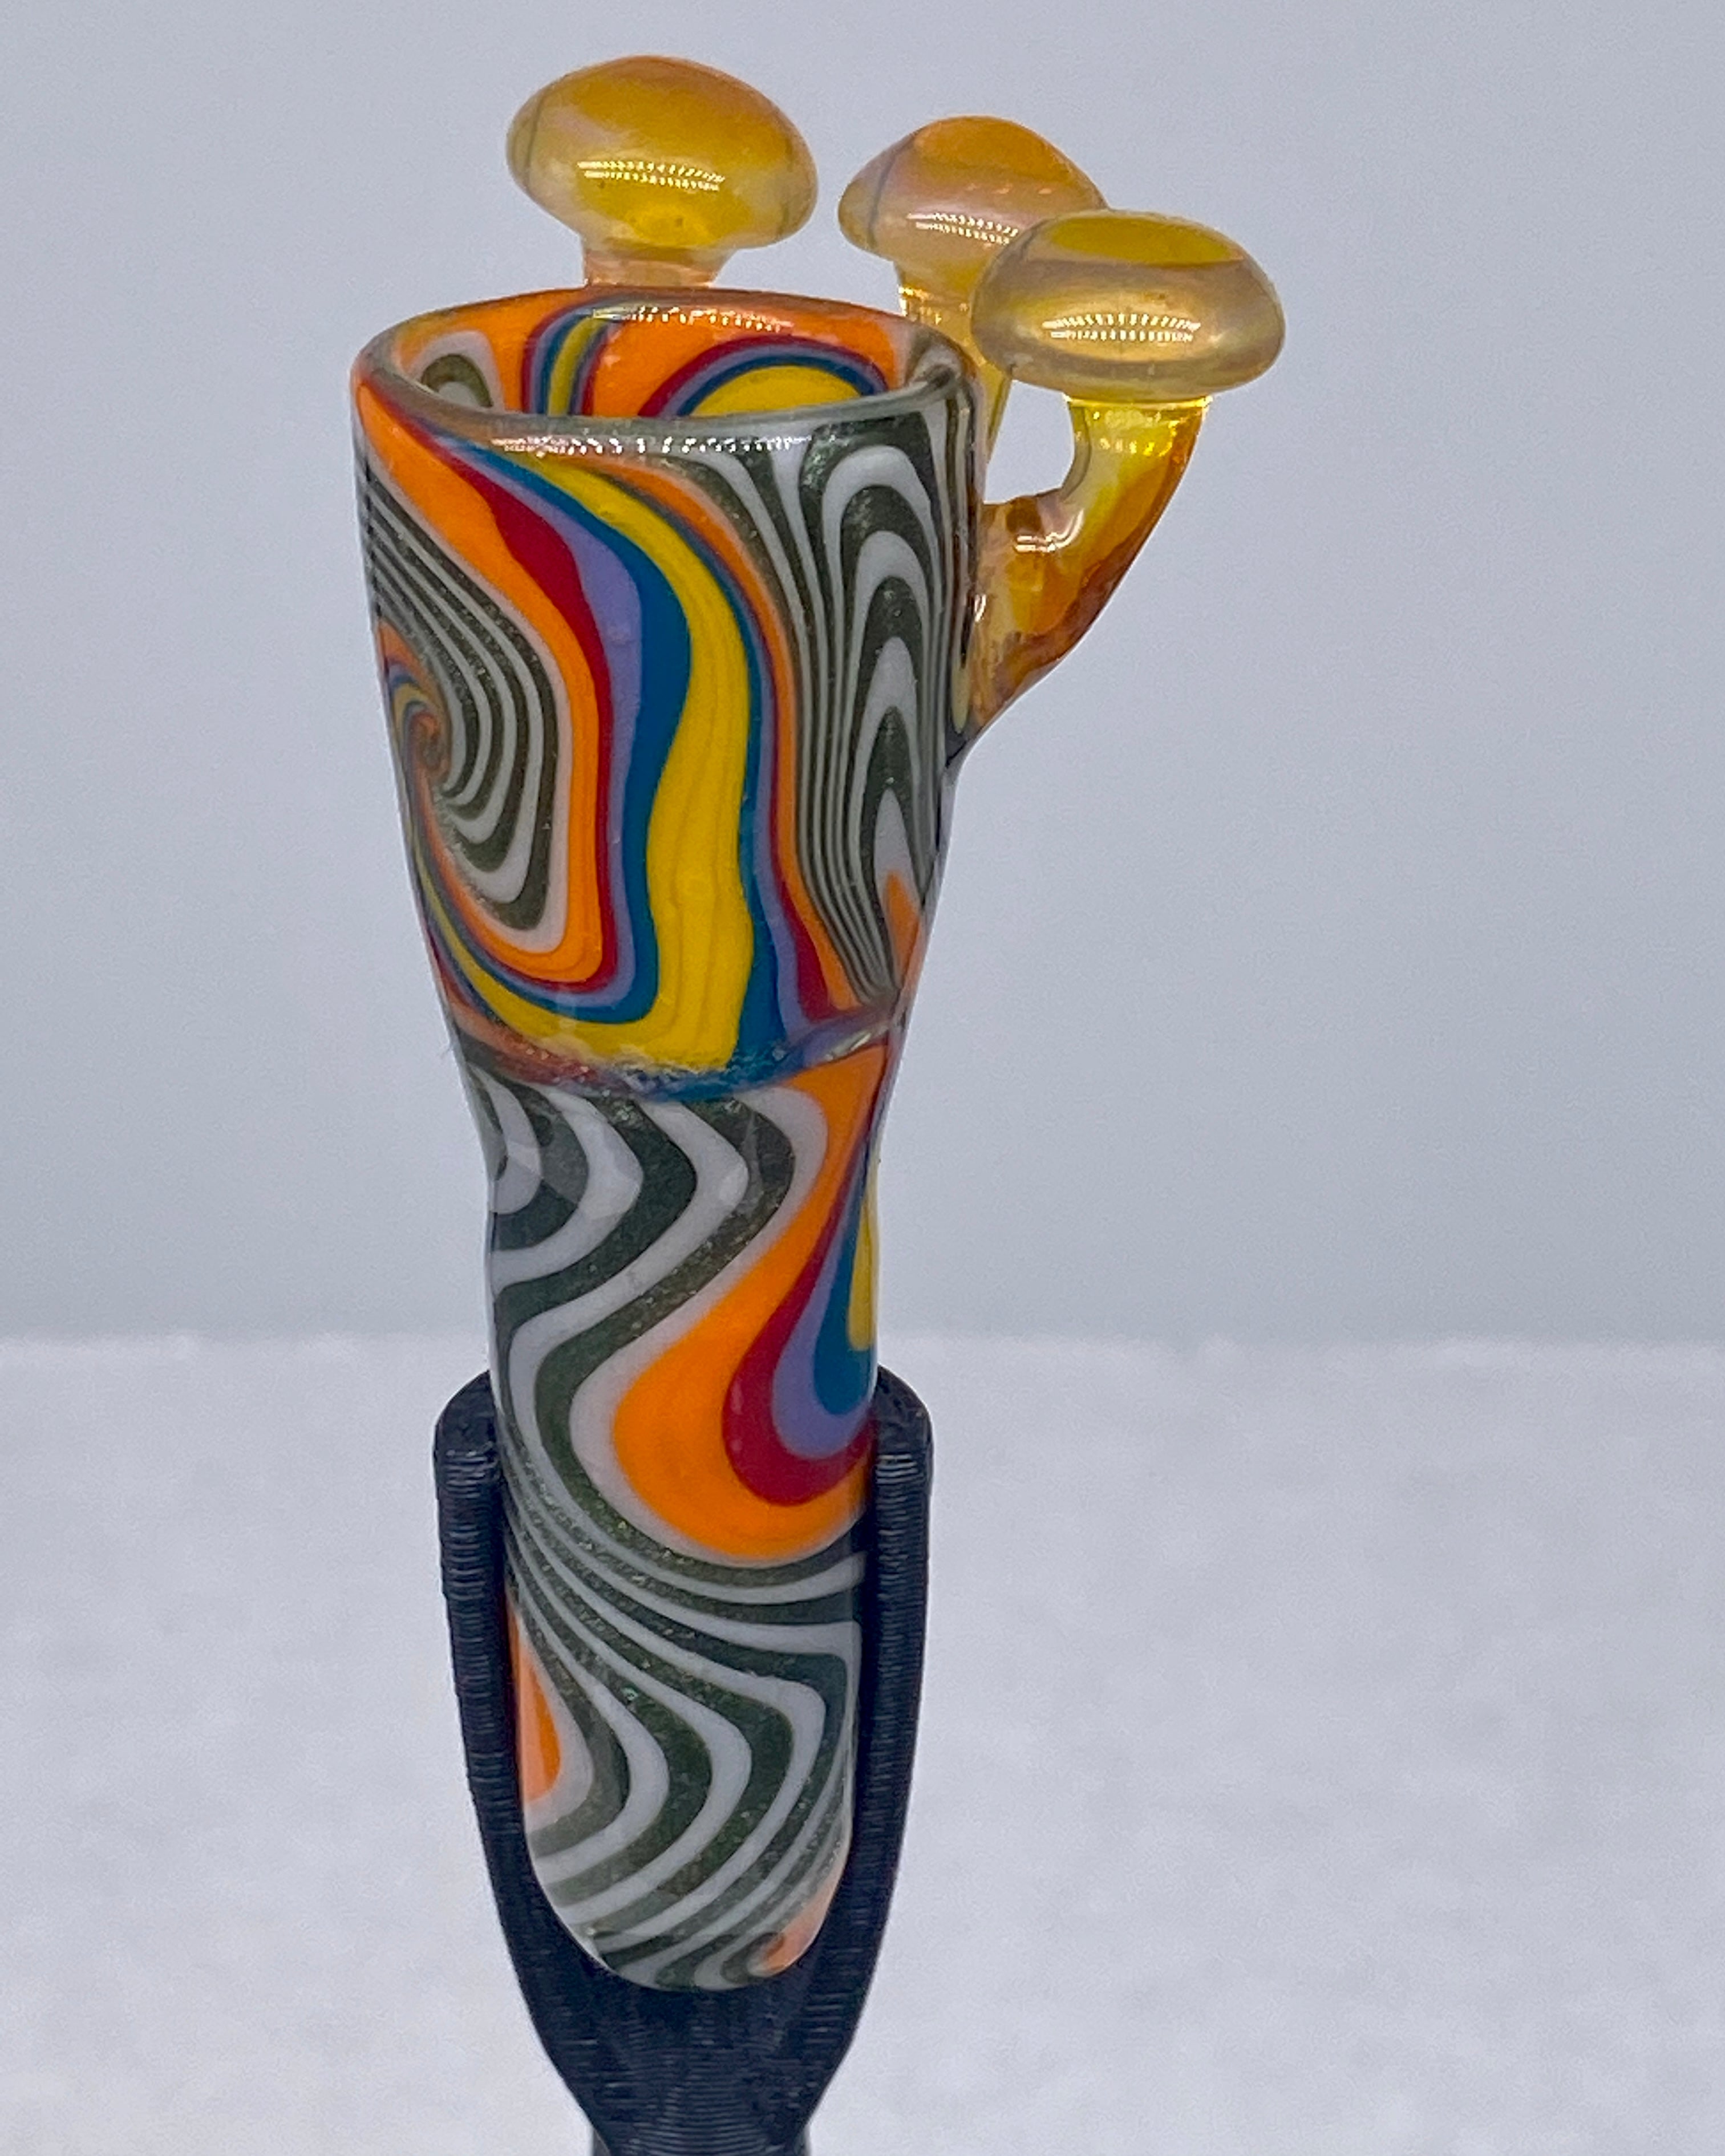 DZ Glass 14mm Fully Worked Wigwag with Mushrooms #1 - TheSmokeyMcPotz Collection 